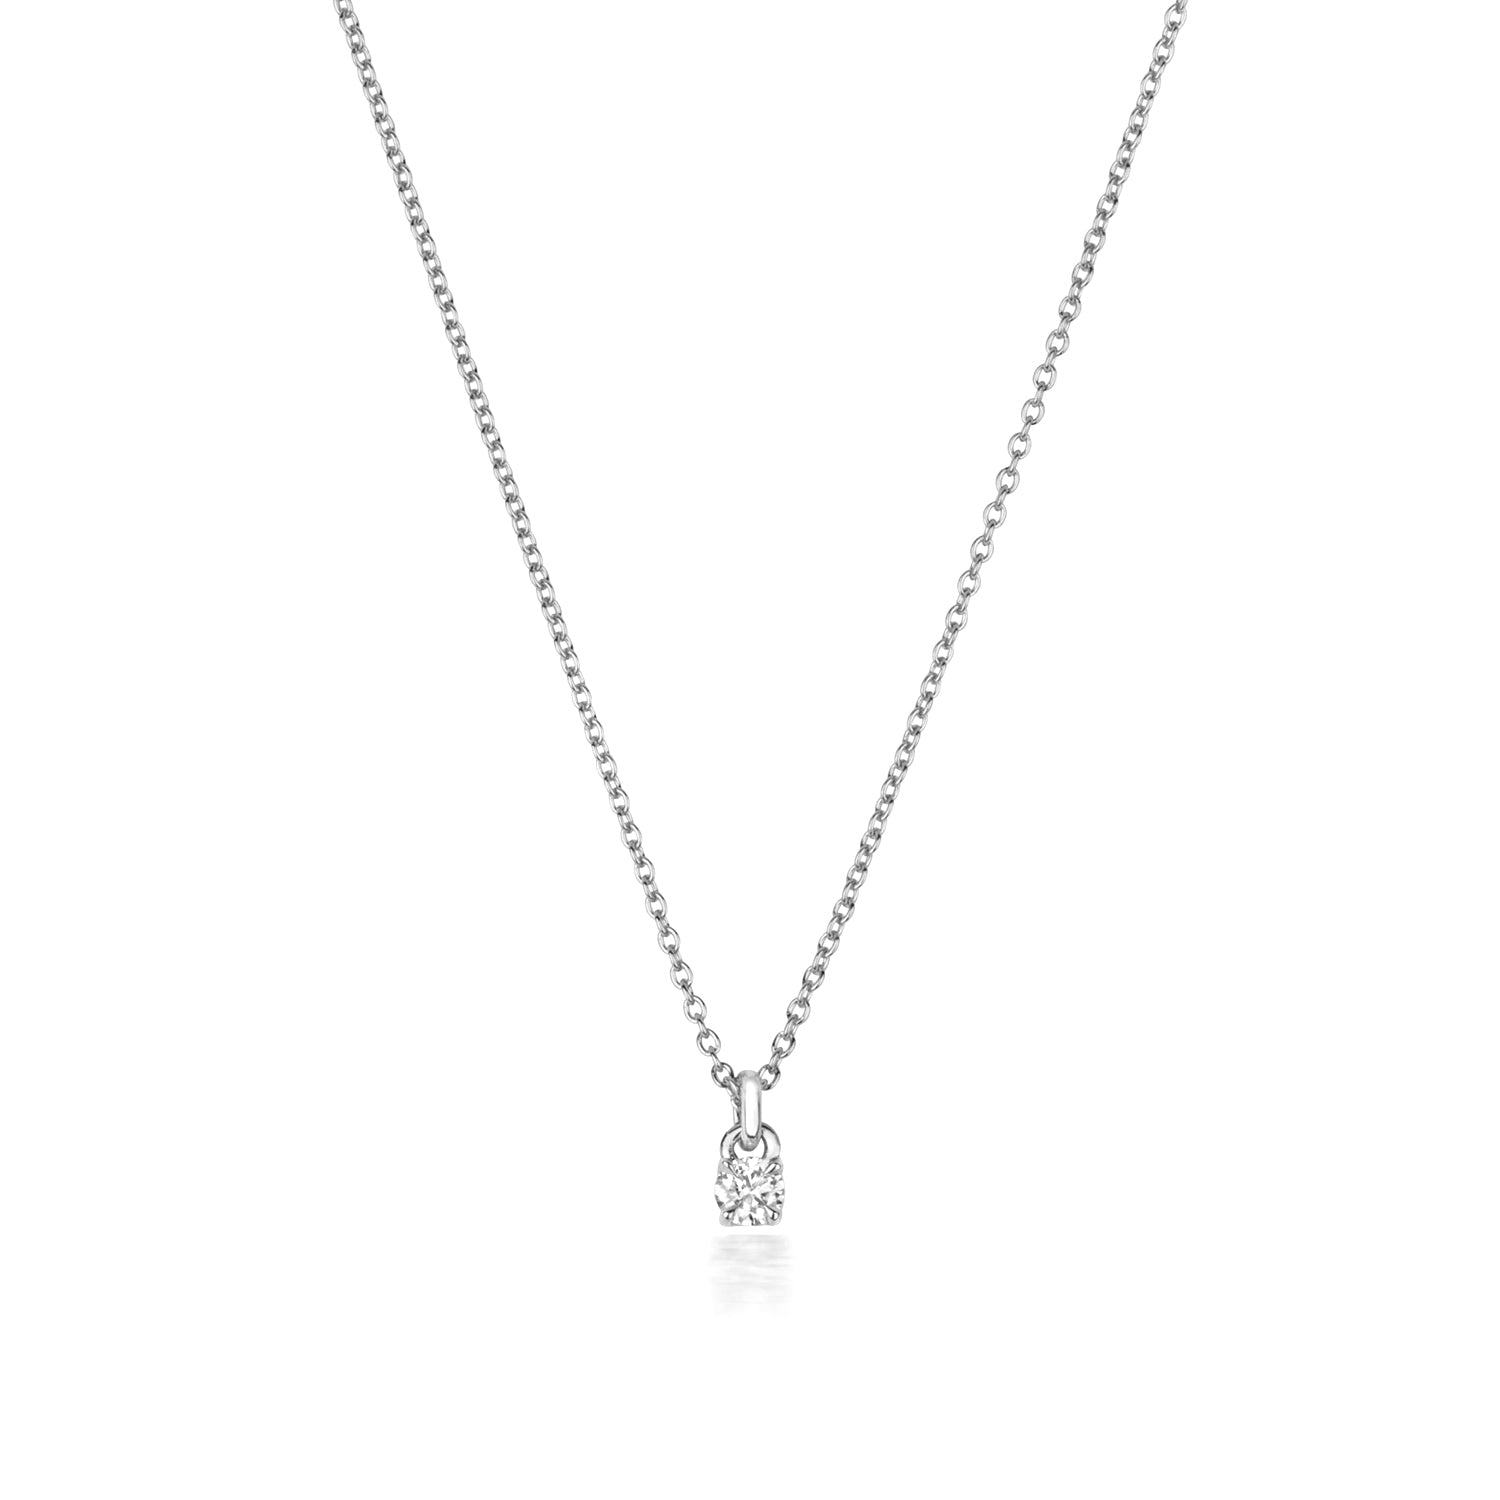 DIAMOND 4 CLAW NECKLACE IN 18 CT WHITE GOLD